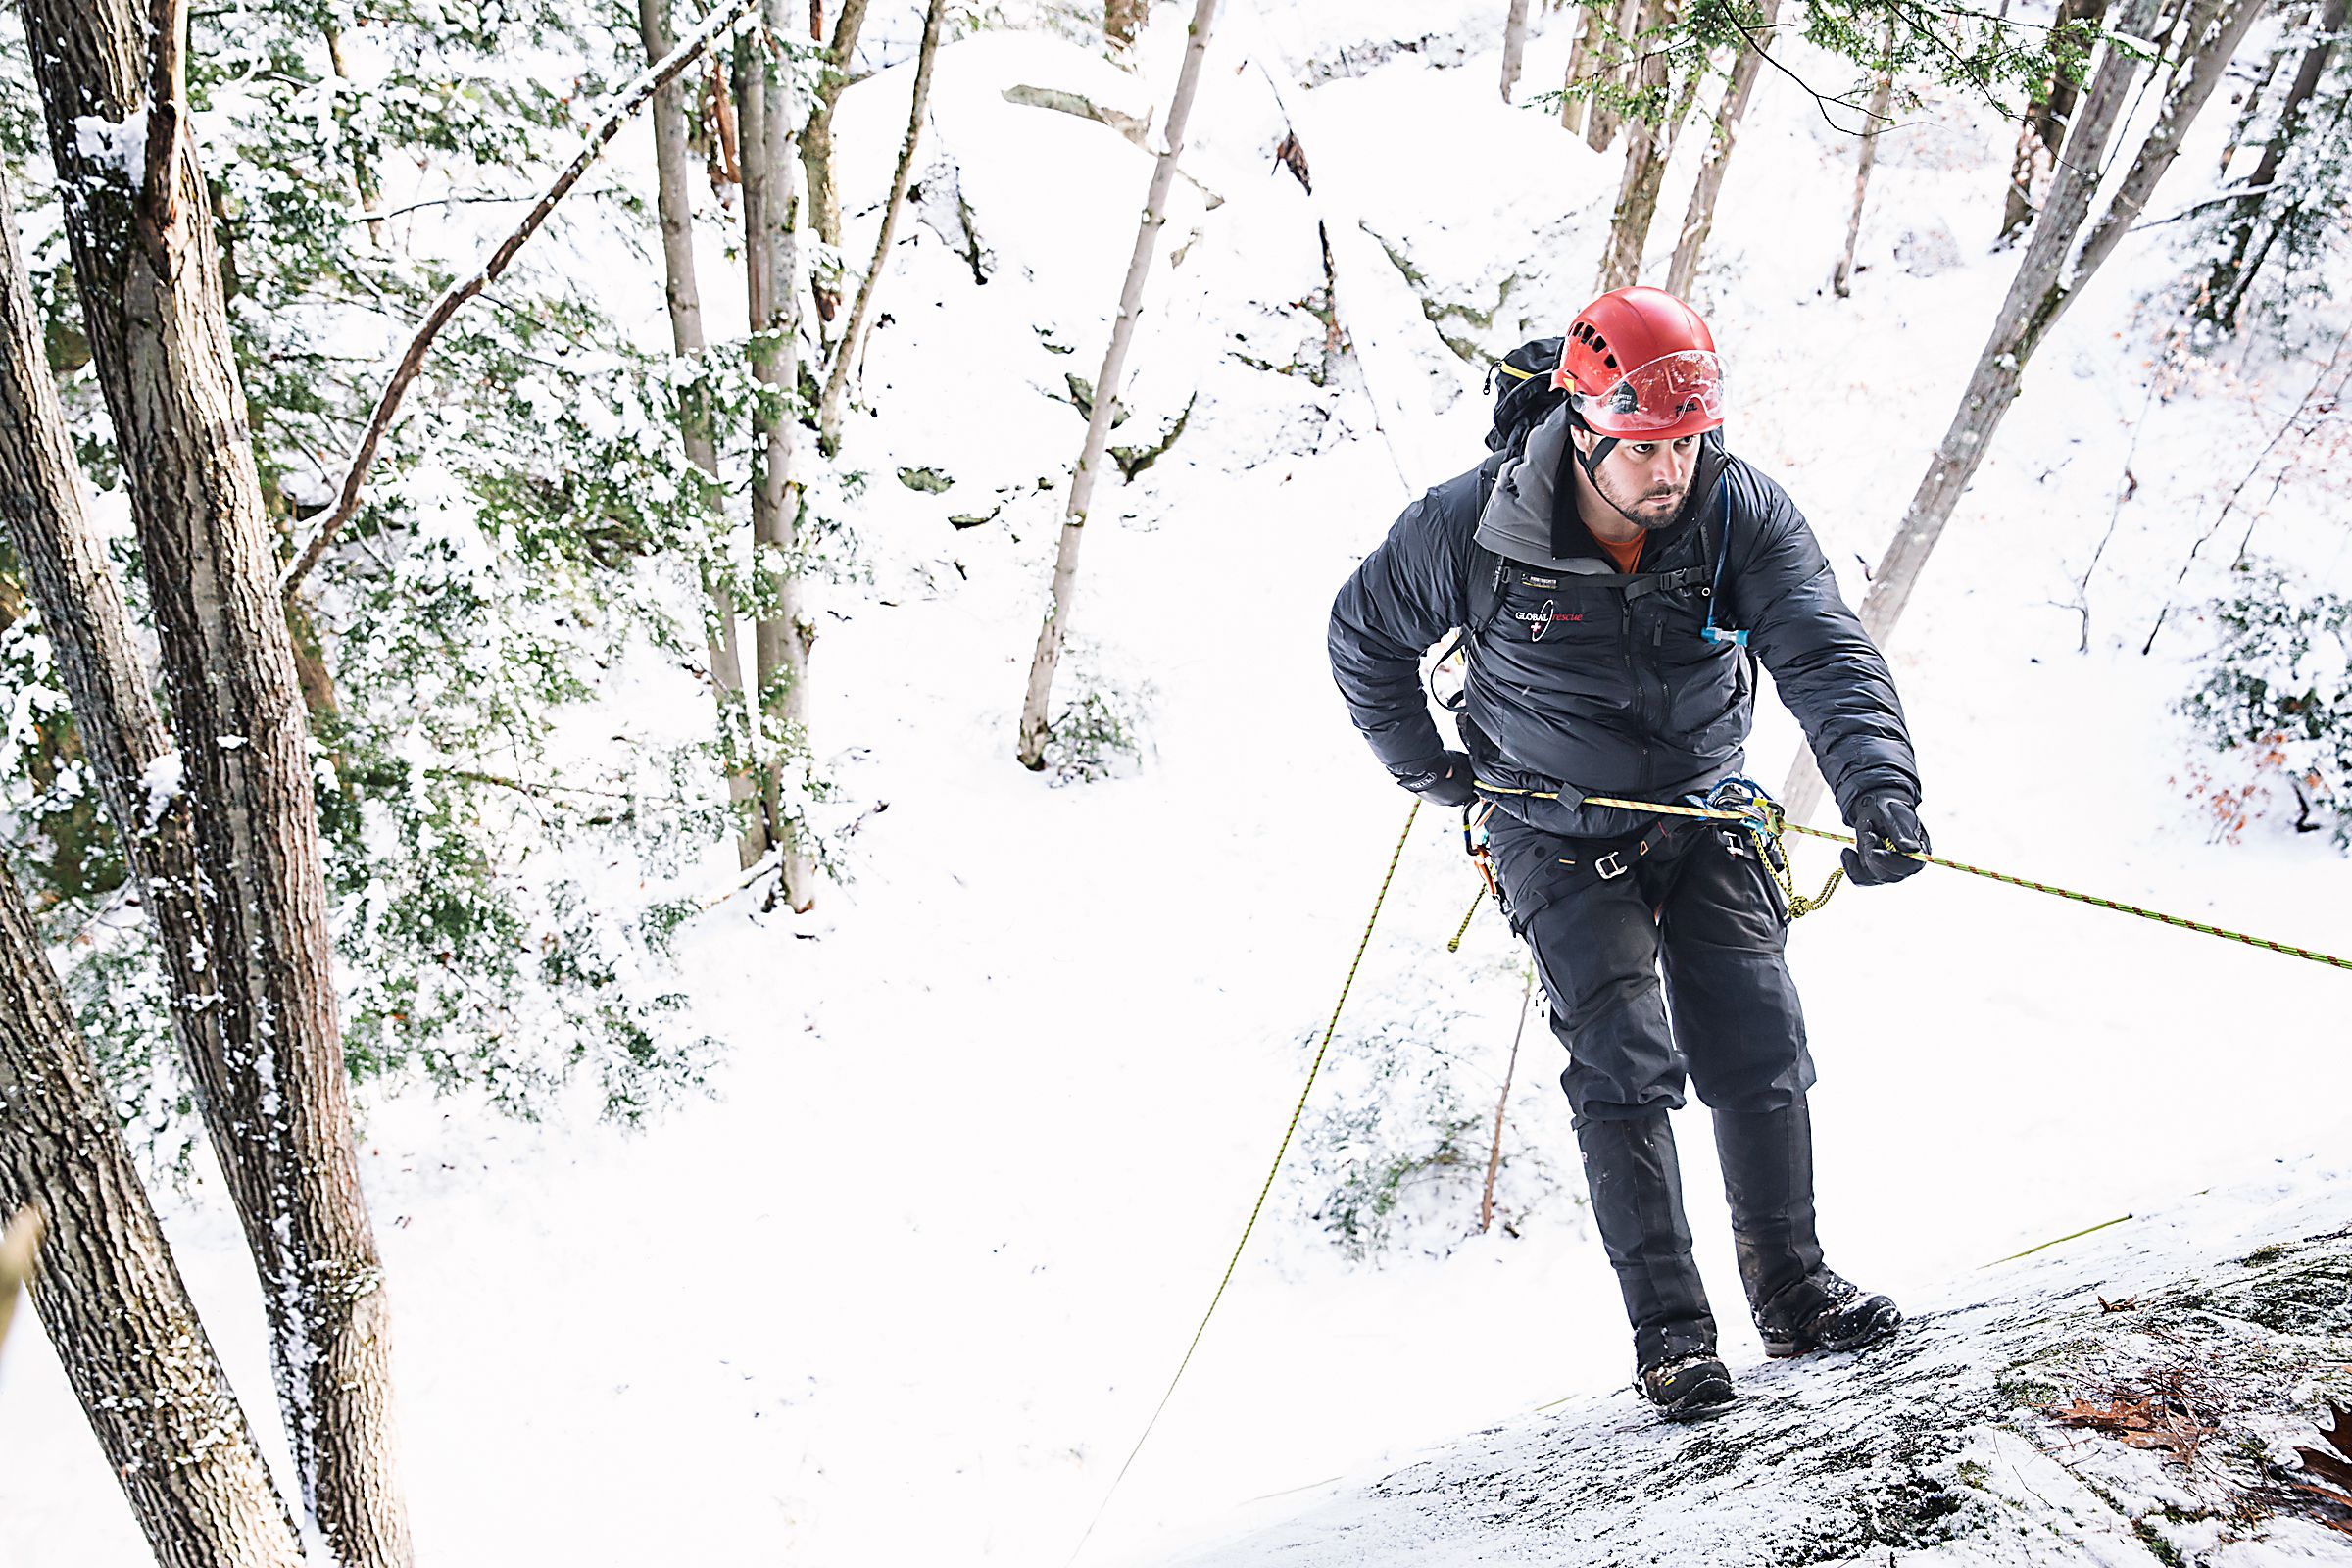 Dave Keaveny, of Canaan, N.H., a medical specialist and advanced EMT with Global Rescue, repels down to a wounded climber below during a training exercise in Lebanon, N.H., on Friday, December 9, 2016. Keaveny comes from a background in ski patrol, ambulance services, and wilderness search and rescue. (Valley News - John Happel) Copyright Valley News. May not be reprinted or used online without permission. Send requests to permission@vnews.com.